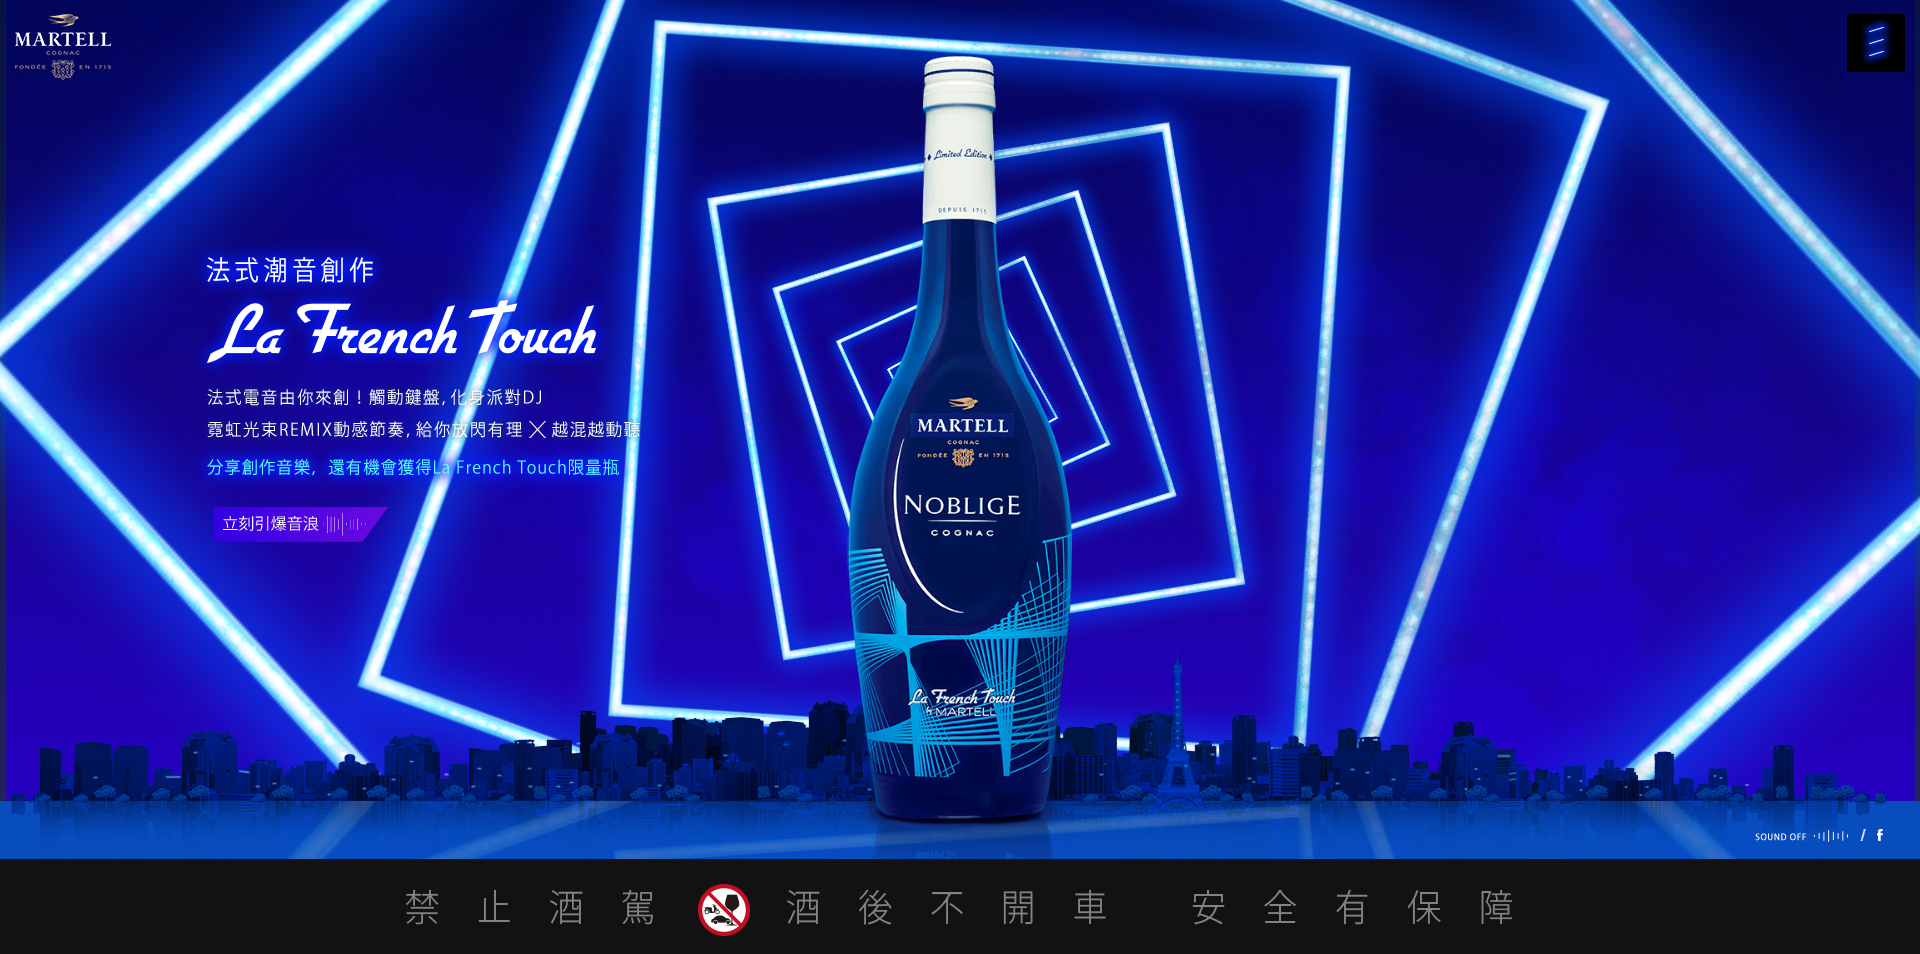  Martell-La French Touch image